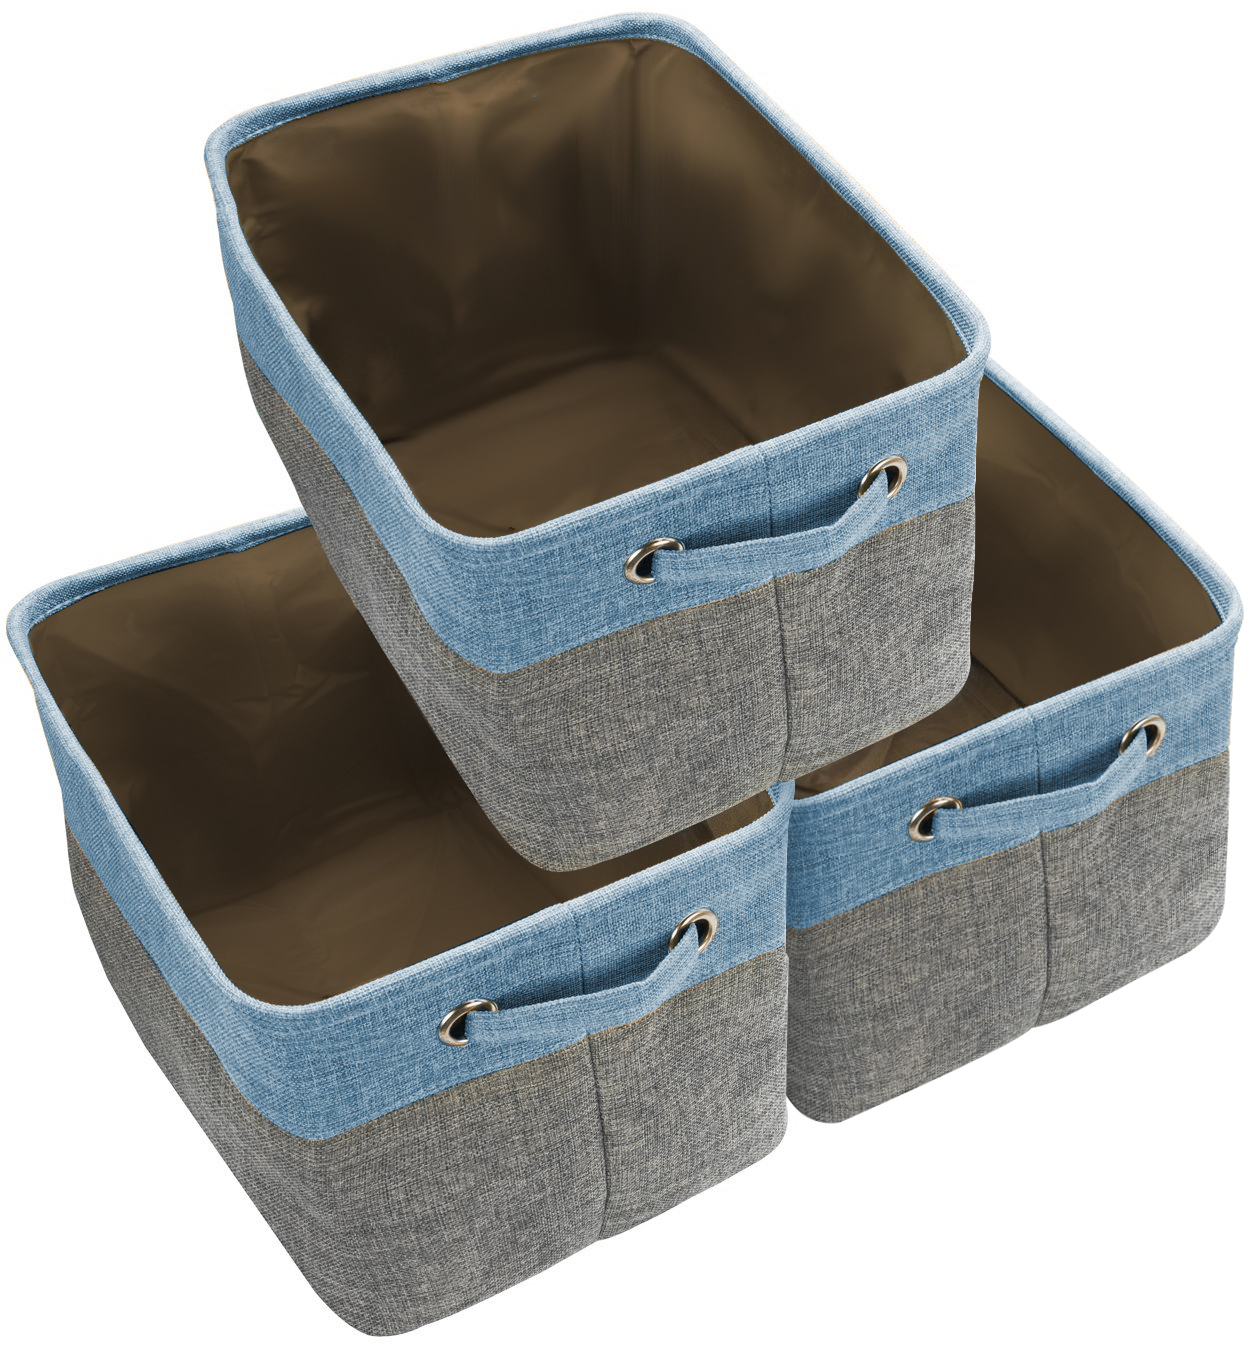 Kid Toys Sorbus Storage Bin Boxes with Lids Closet Fabric Baskets for Shelves and more Home Office Set of 3 Clothing Gray